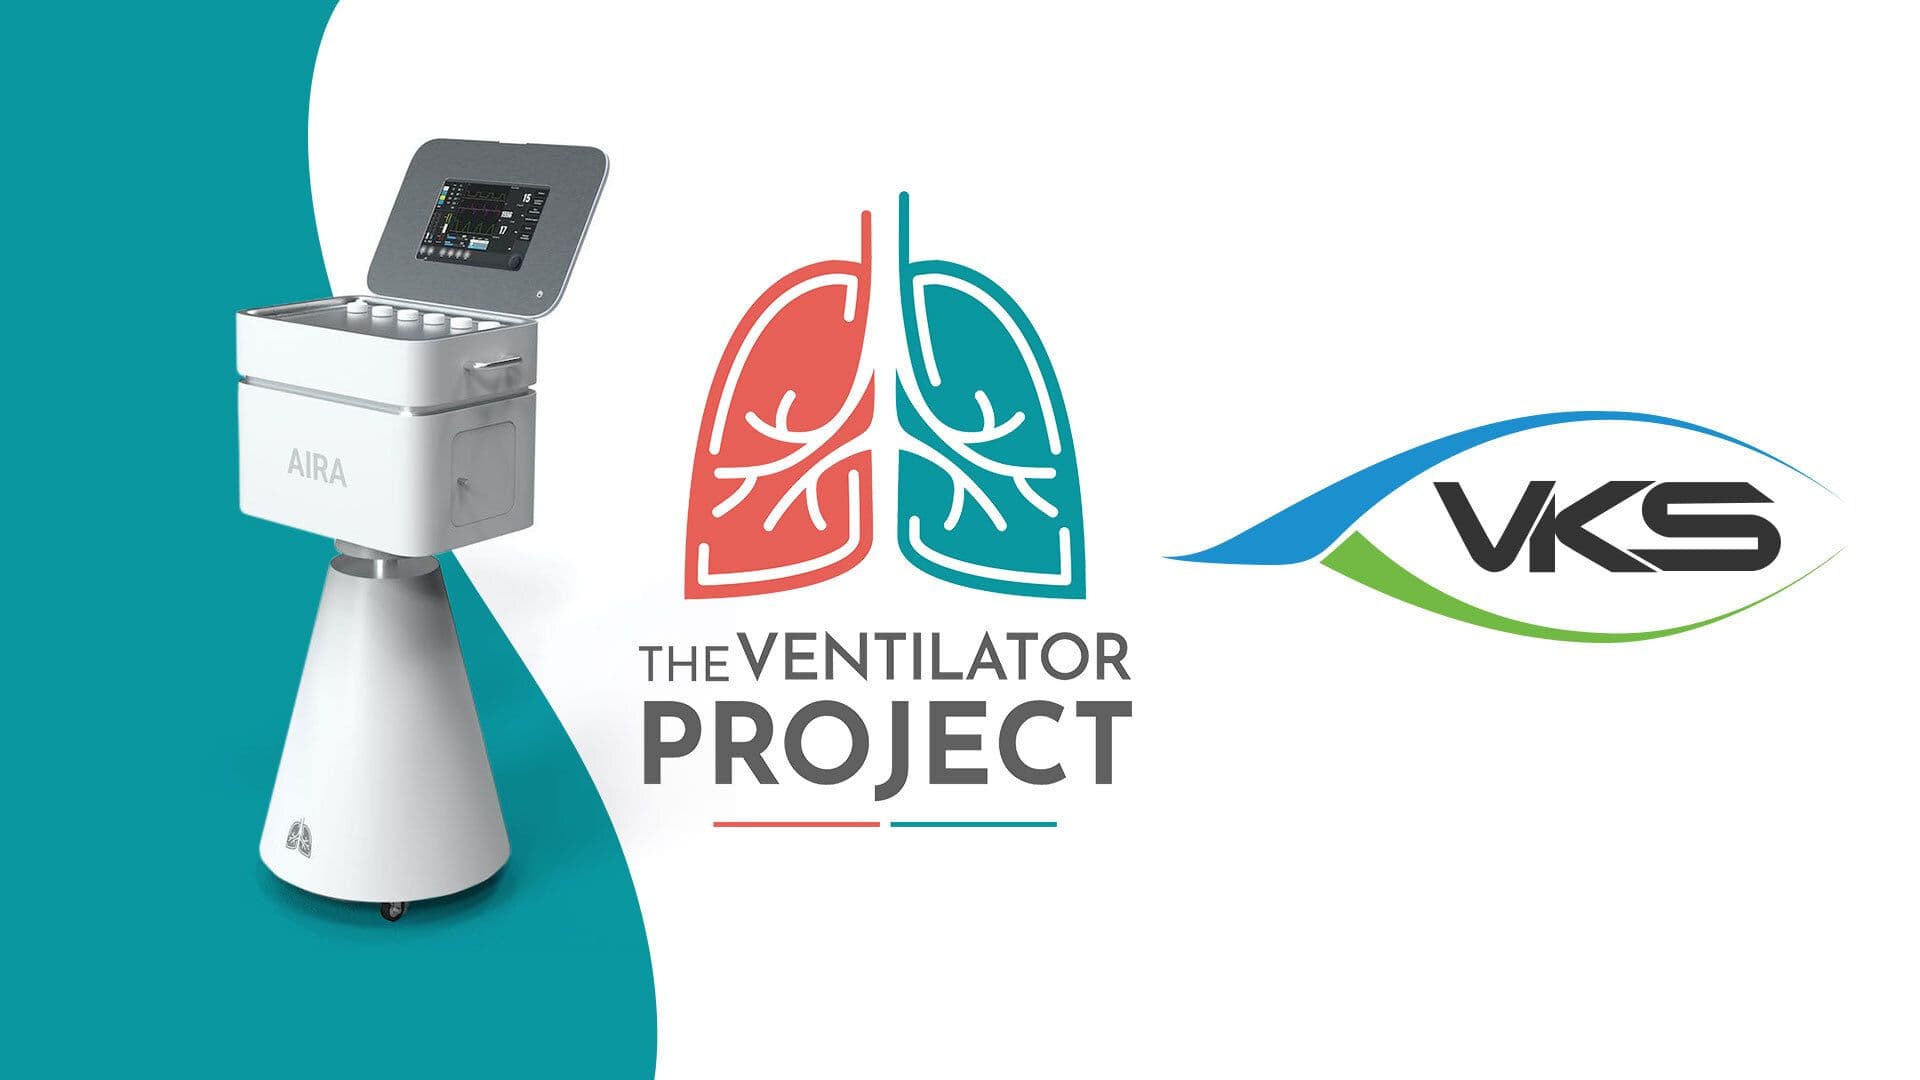 The Ventilator Project Partnership Breathes New Life Into The Industrial World